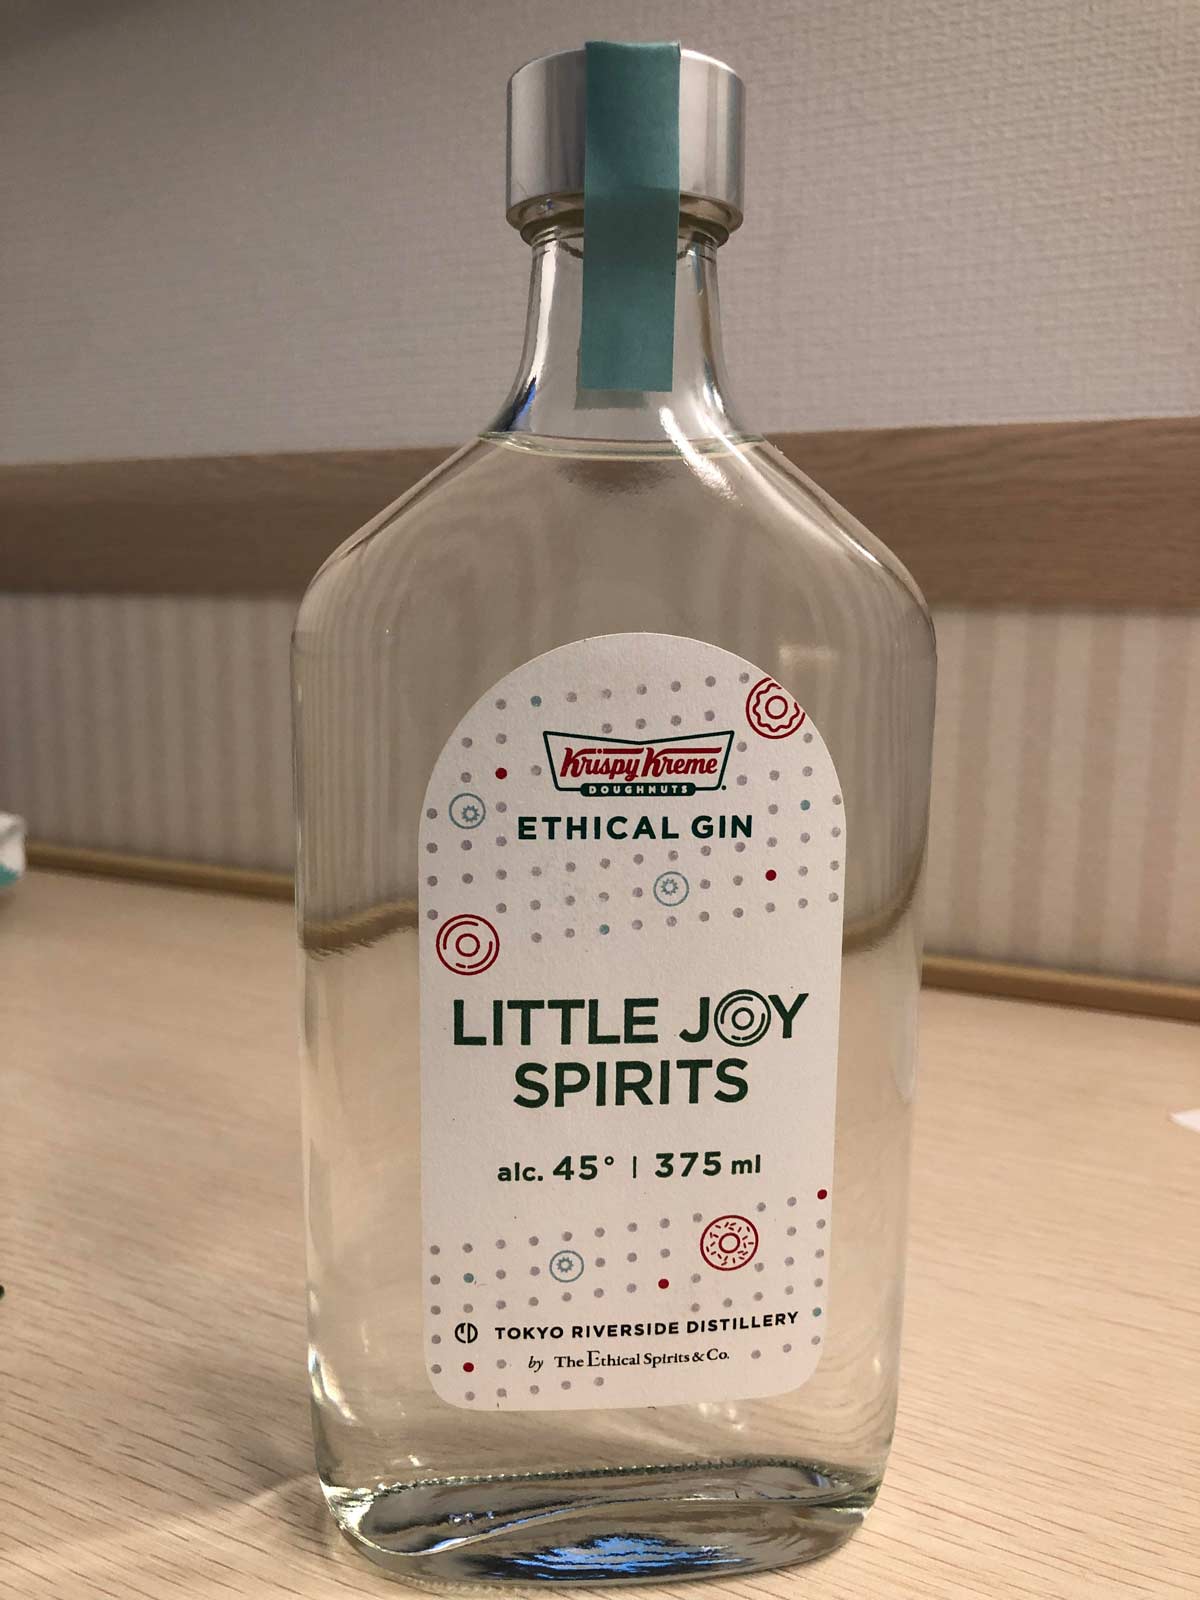 They only use free-range, grass-fed Krispy Kremes when making their gin